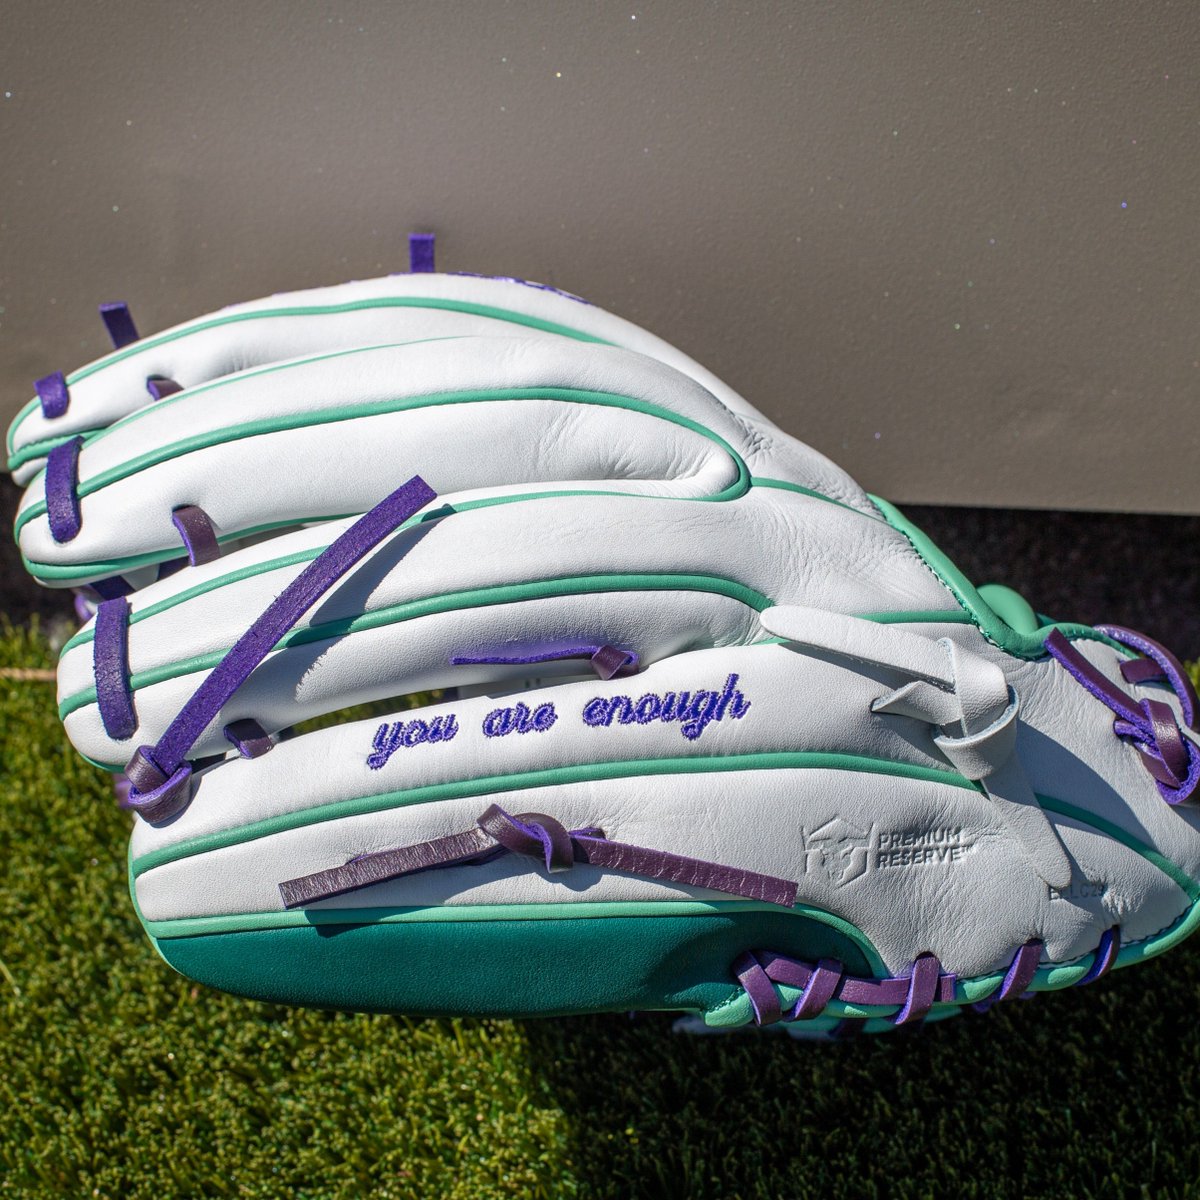 You're mental health is important 💚 In honor of #MentalHealthAwarenessMonth we're giving away this special Easton Custom Glove! Head to our Instagram to see how to enter! 💜